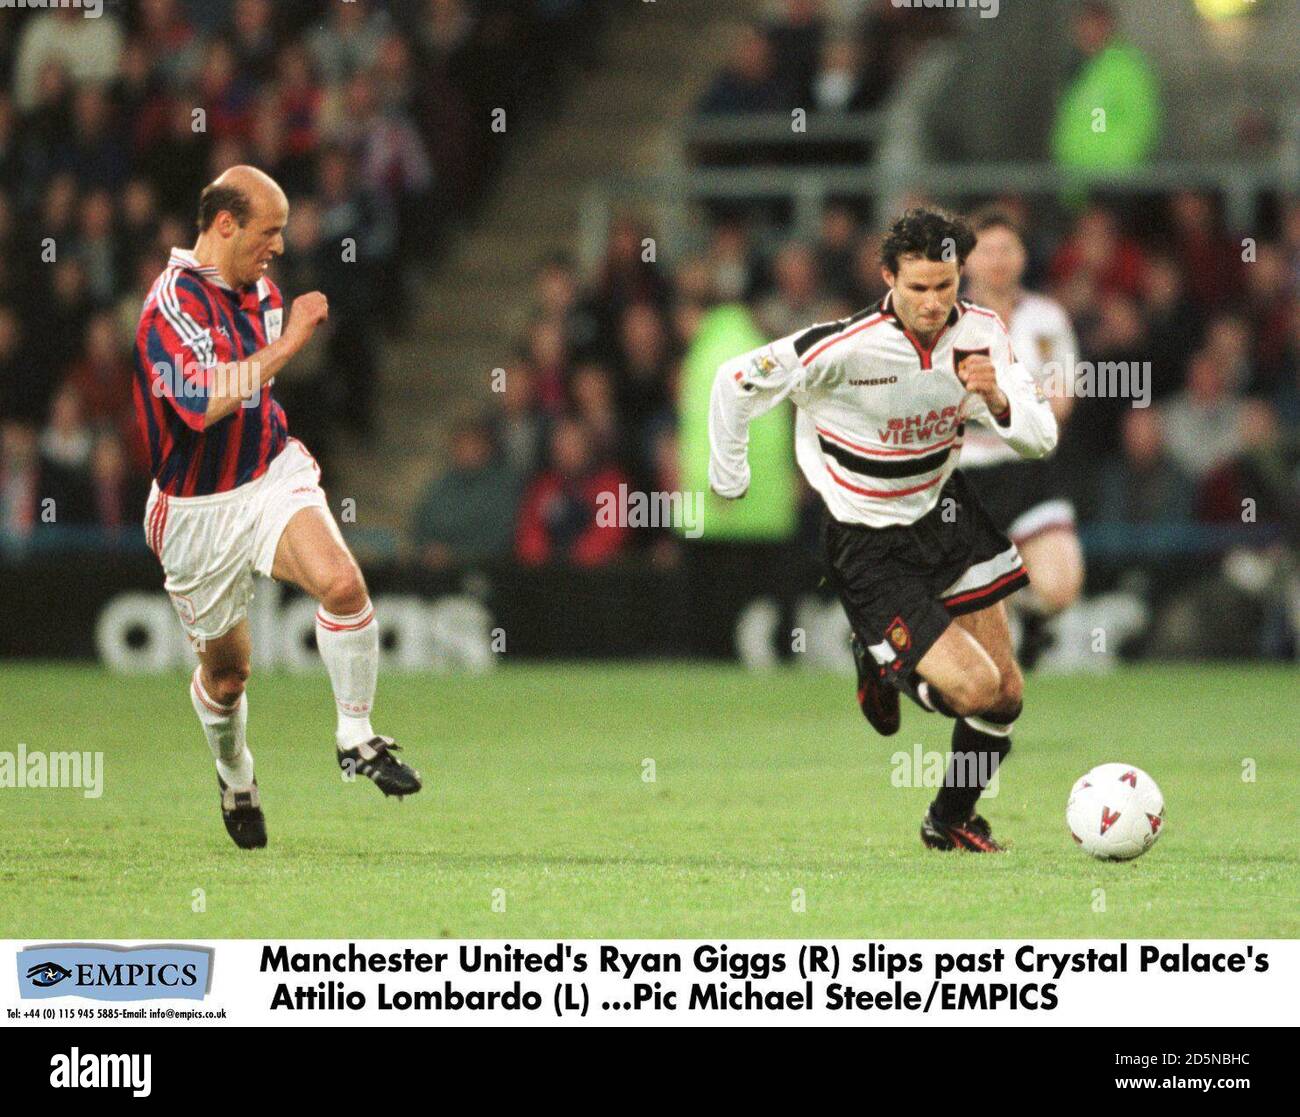 Manchester United's Ryan Giggs (R) slips past Crystal Palace's Attilio Lombardo (L) Stock Photo